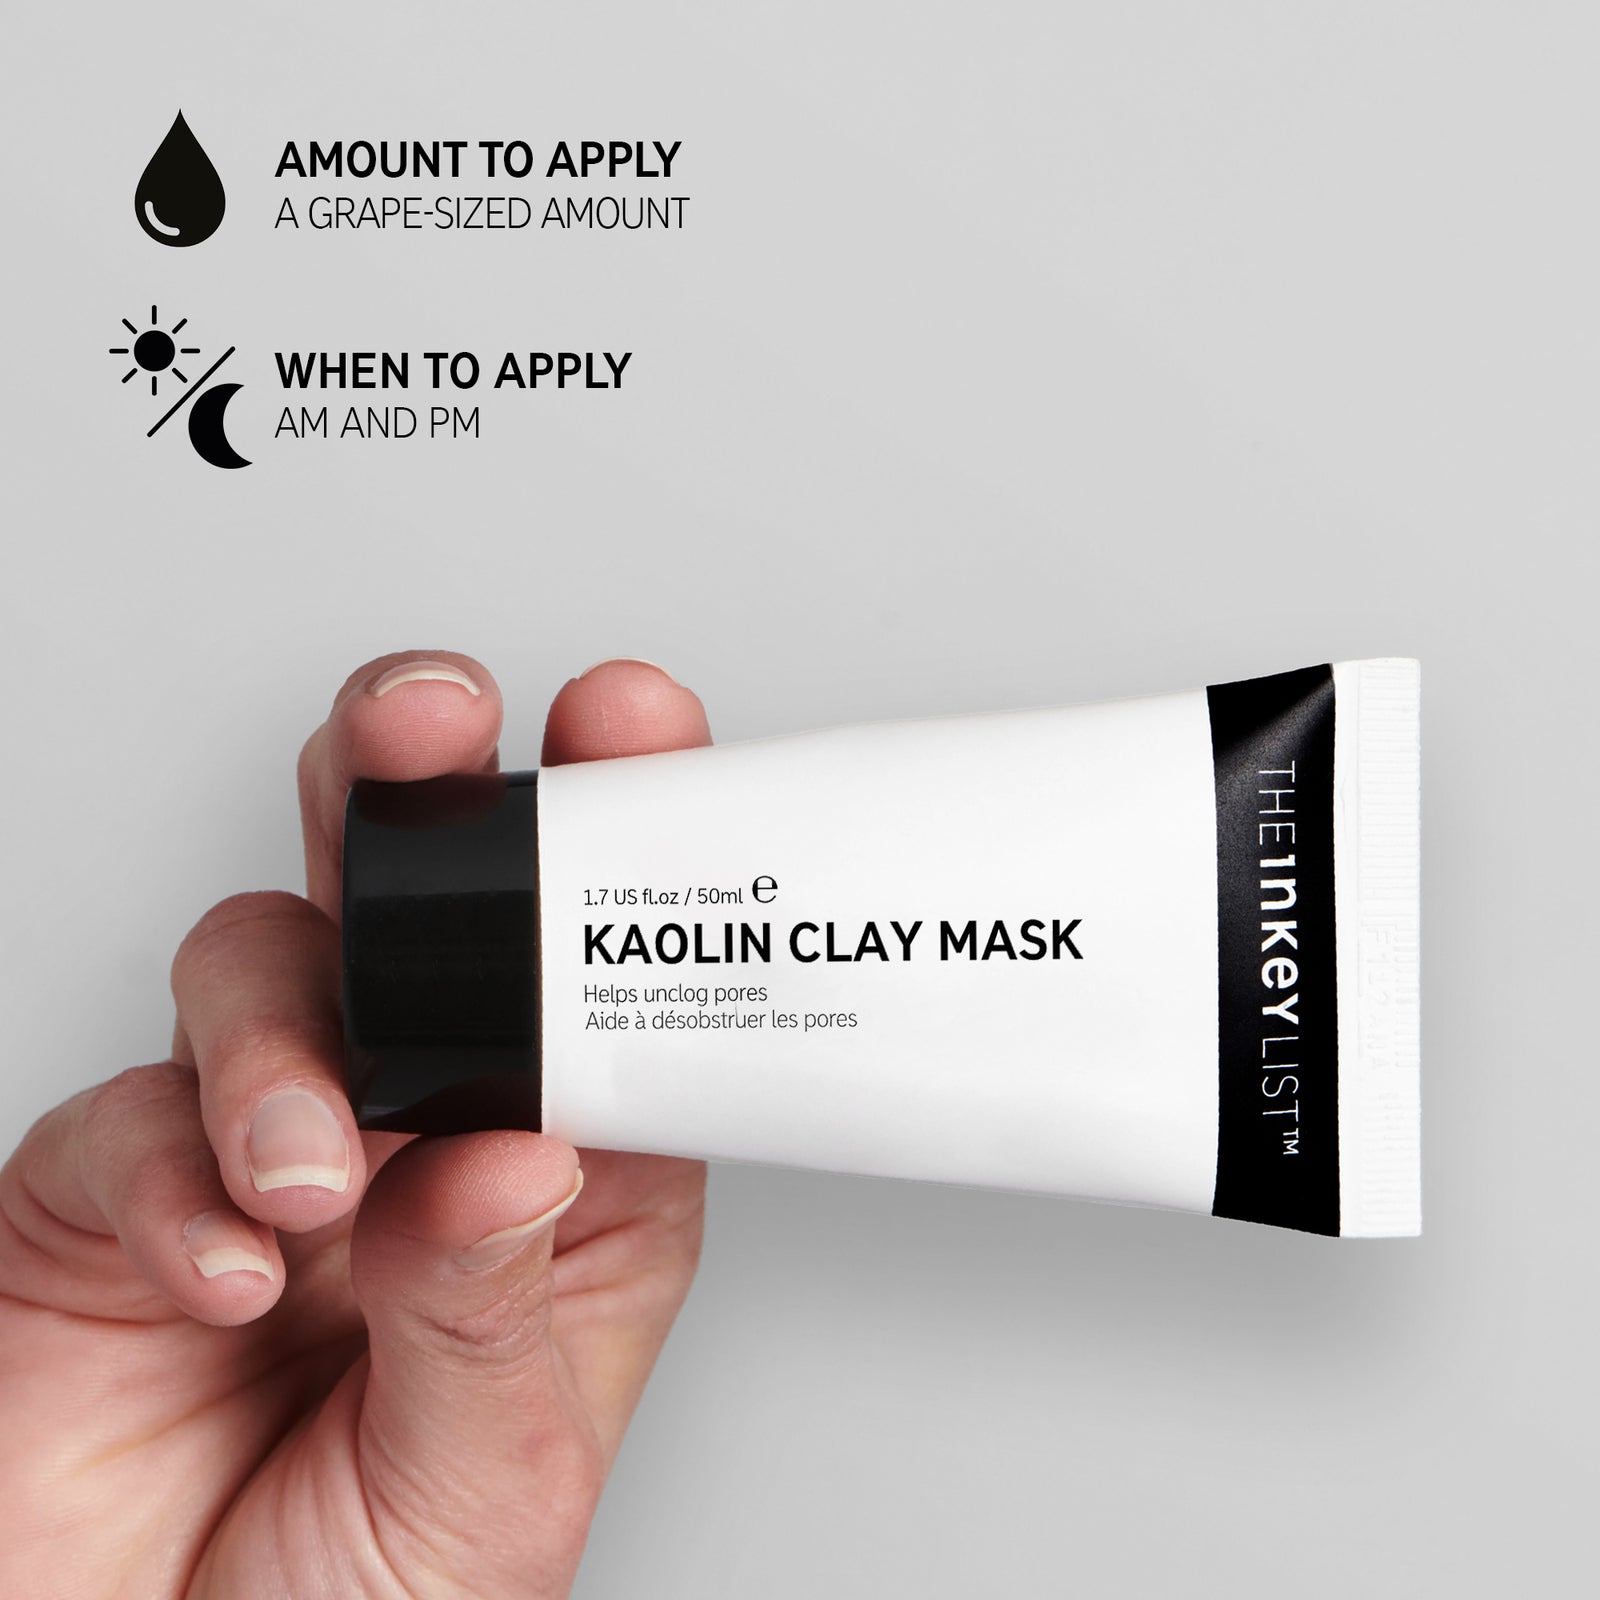 Hand holding a tube of Kaolin Clay Mask against a grey background with black text explaining how and when to use it